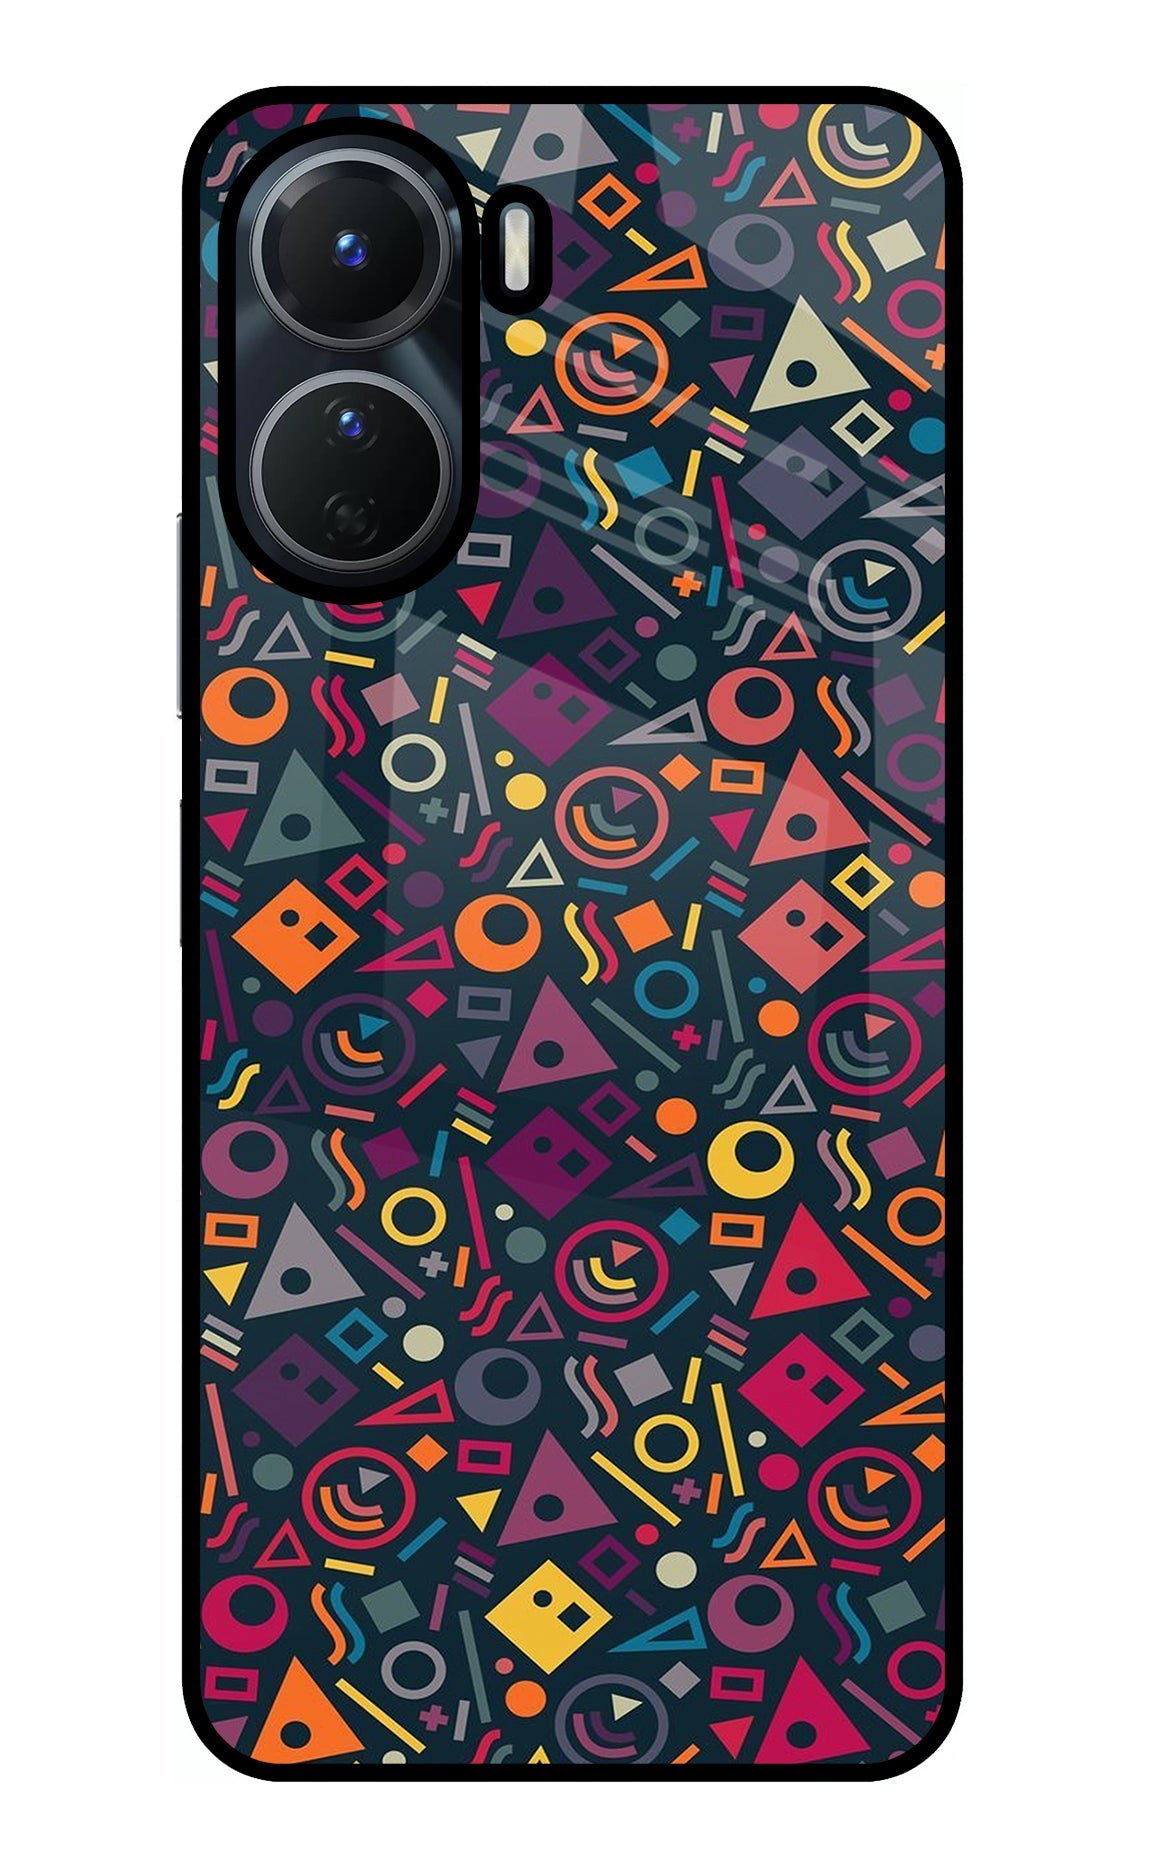 Geometric Abstract Vivo Y16 Back Cover